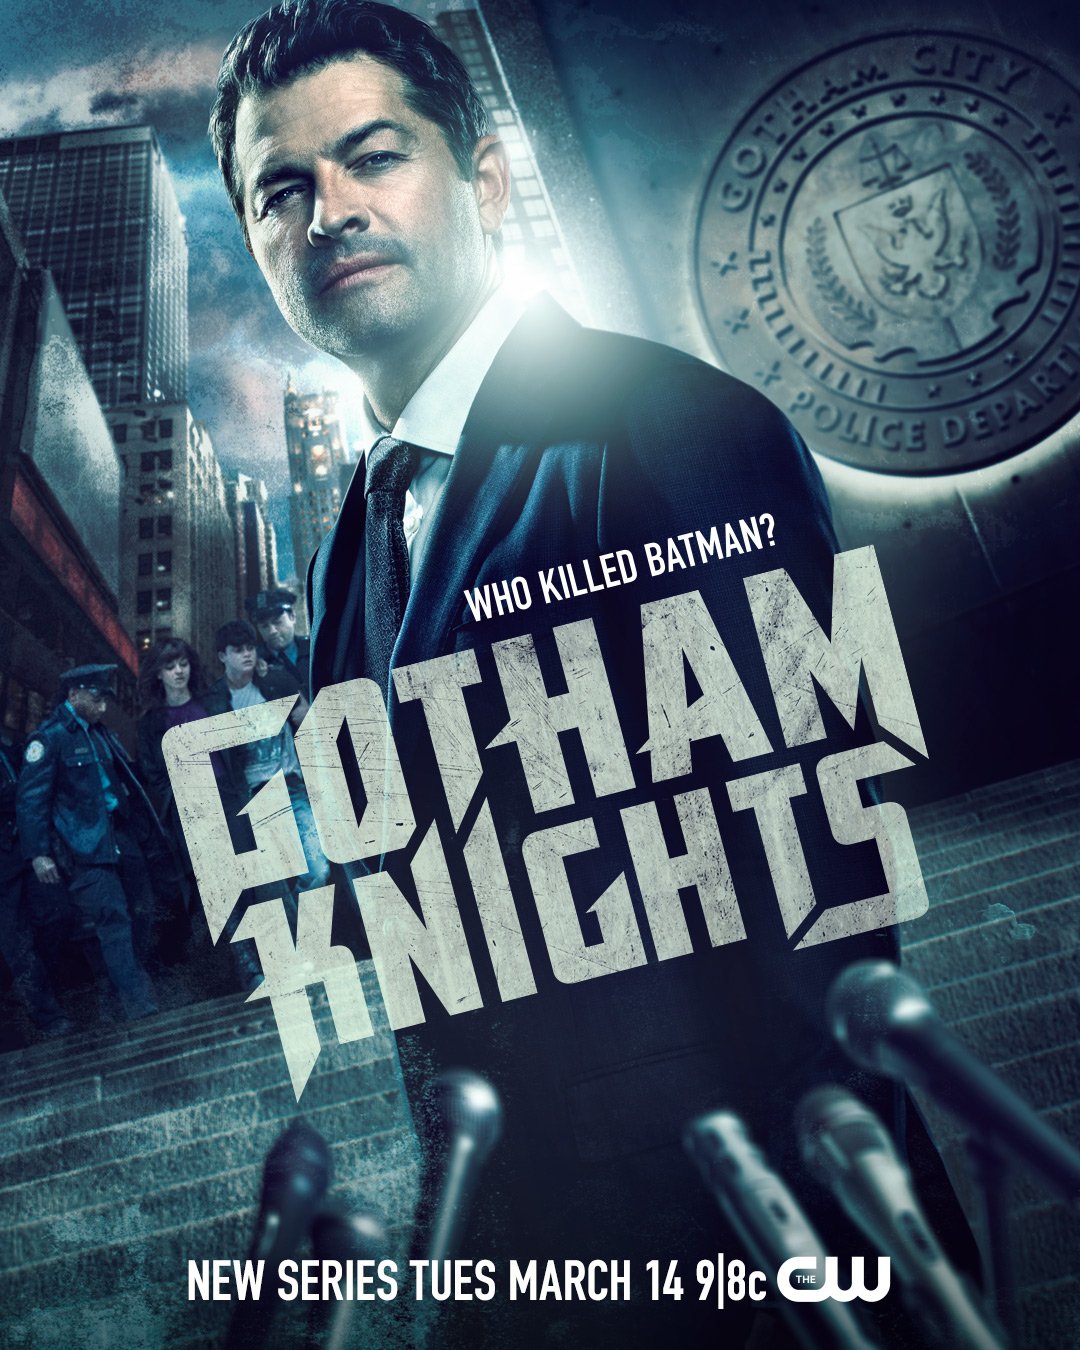 Gotham Knights Recap With Spoilers: Bad to Be Good